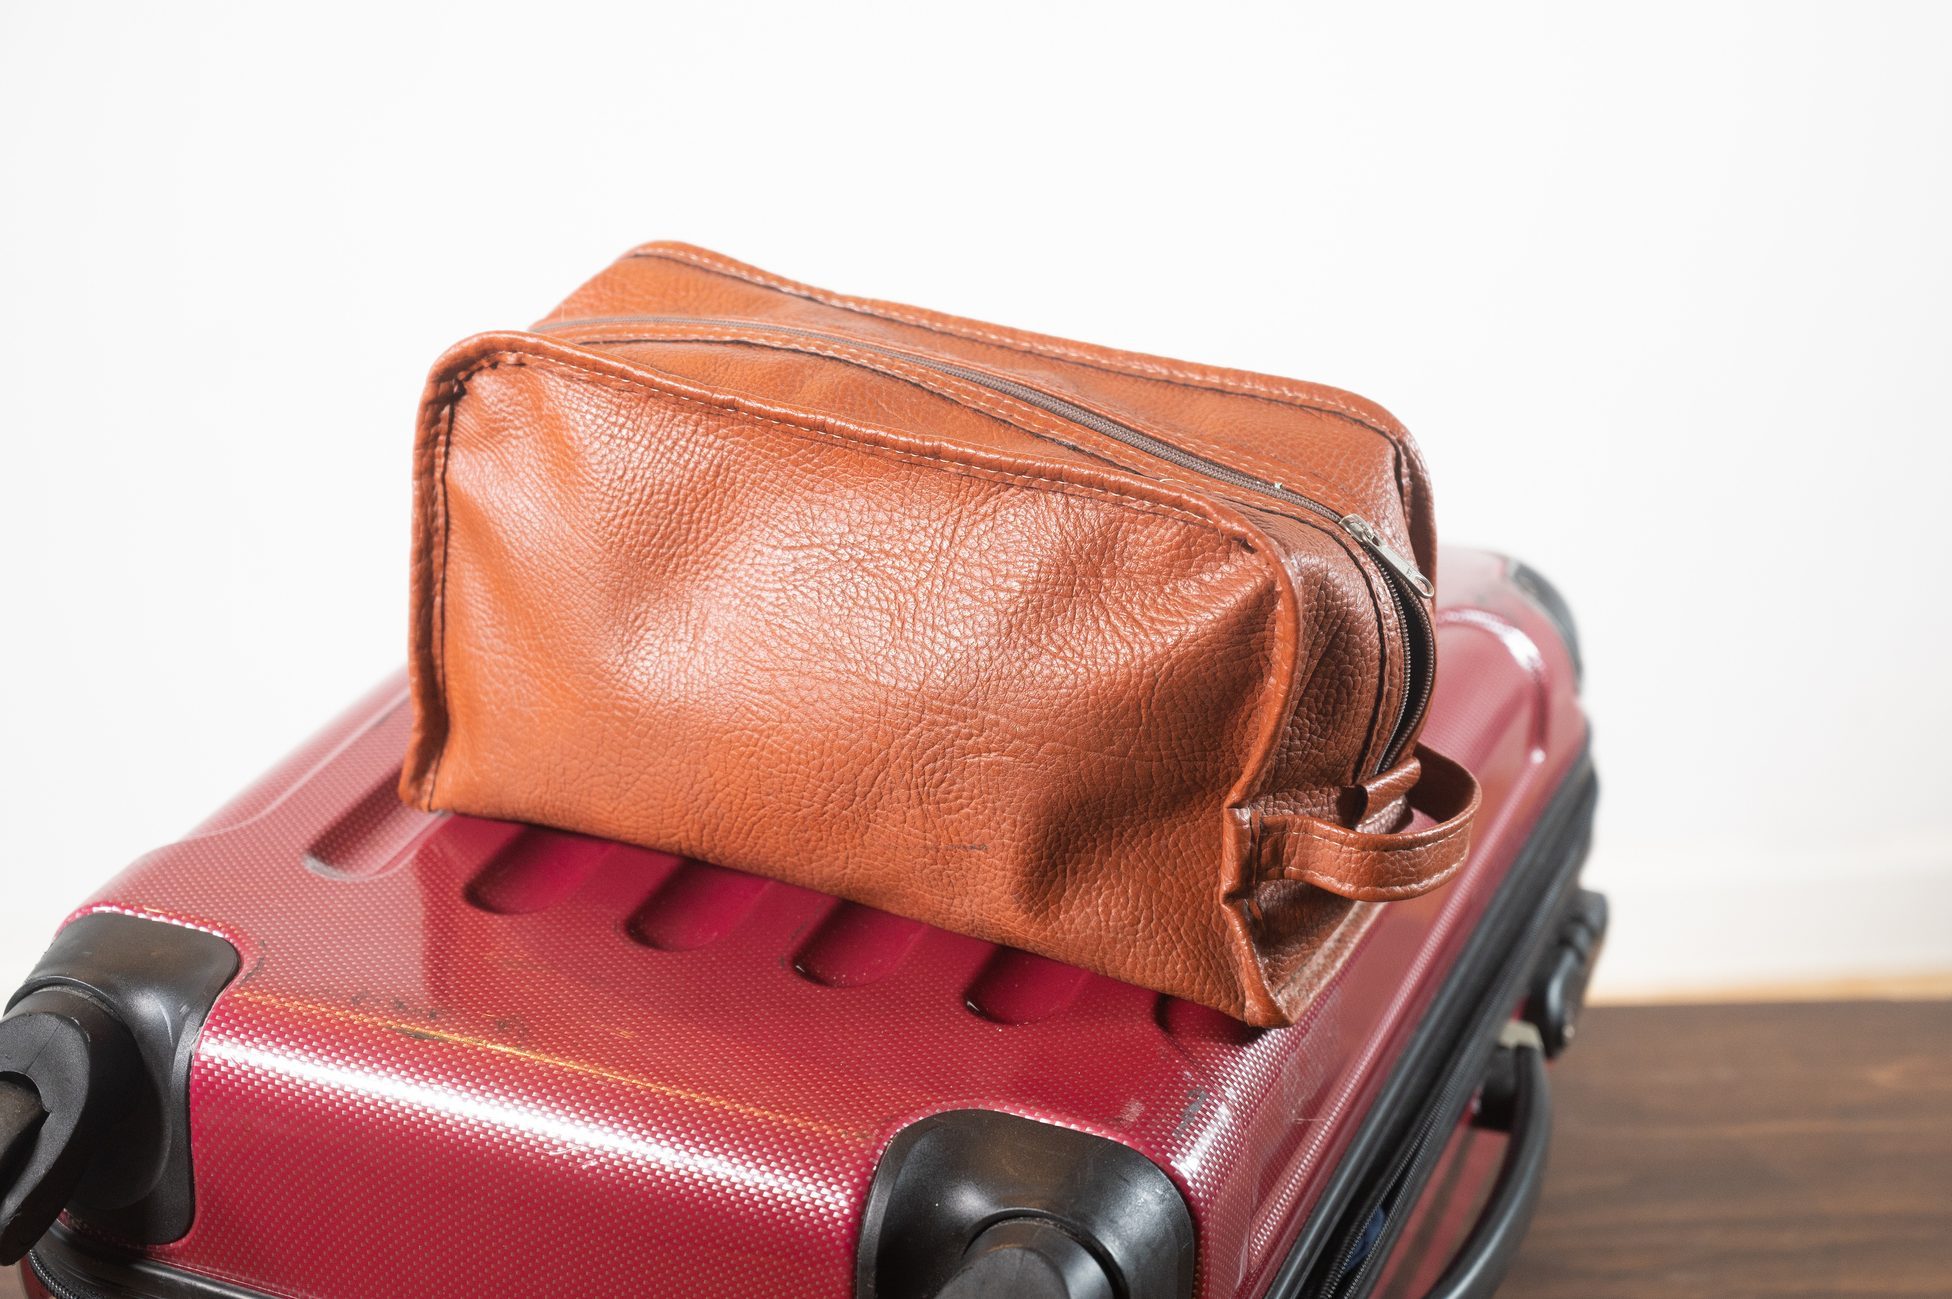 <p>Remember Murphy's Law? "Anything that can go wrong, will go wrong." Put anything that can spill in a separate toiletry bag to avoid damaging your clothes. If you're only taking a carry-on, make sure all your toiletries follow the <a href="https://www.rd.com/article/tsa-carry-on-rules/" rel="noopener noreferrer">TSA carry-on rules</a>, which state that liquids must be 3.4 ounces or less and must all be placed in a one-quart size bag.</p> <p>Keep bulky makeup at home and remember to pack your toiletry bag last so it doesn't get squished under your clothes in a checked bag and so you can remove it quickly when you go through security with a carry-on. A <a href="https://www.amazon.com/Approved-Toiletry-Transparent-Through-Organizer/dp/B01IRYYYHU?th=1" rel="noopener noreferrer">transparent bag</a> not only makes it easier for agents to see what's inside, it's also a top <a href="https://www.rd.com/article/holiday-travel-tips/" rel="noopener noreferrer">travel tip</a> to ace airport security.</p> <p class="listicle-page__cta-button-shop"><a class="shop-btn" href="https://www.amazon.com/Approved-Toiletry-Transparent-Through-Organizer/dp/B01IRYYYHU?th=1">Shop the Toiletry Bag</a></p>